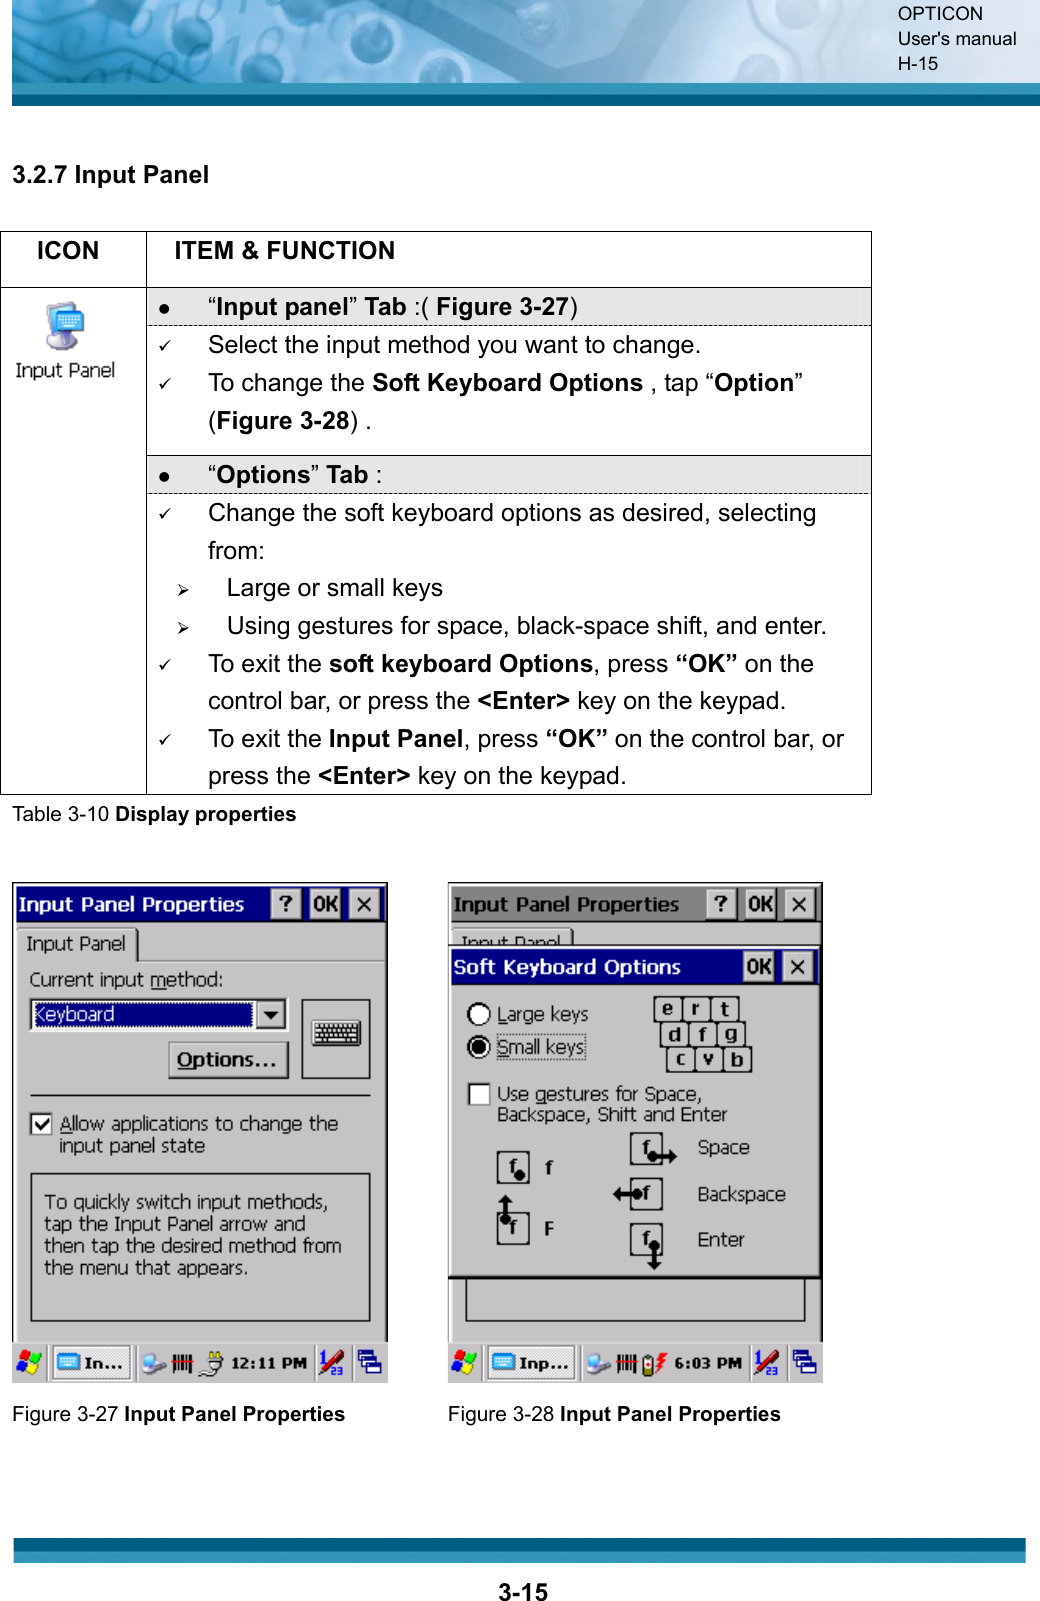 OPTICON User&apos;s manual H-153-153.2.7 Input Panel ICON ITEM &amp; FUNCTION z“Input panel”Tab :( Figure 3-27)9Select the input method you want to change.9To change the Soft Keyboard Options , tap “Option”(Figure 3-28) .z“Options”Tab : 9Change the soft keyboard options as desired, selecting from:¾Large or small keys¾Using gestures for space, black-space shift, and enter.9To exit the soft keyboard Options, press “OK” on the control bar, or press the &lt;Enter&gt; key on the keypad.9To exit the Input Panel, press “OK” on the control bar, or press the &lt;Enter&gt; key on the keypad.Table 3-10 Display propertiesFigure 3-27 Input Panel Properties  Figure 3-28 Input Panel Properties